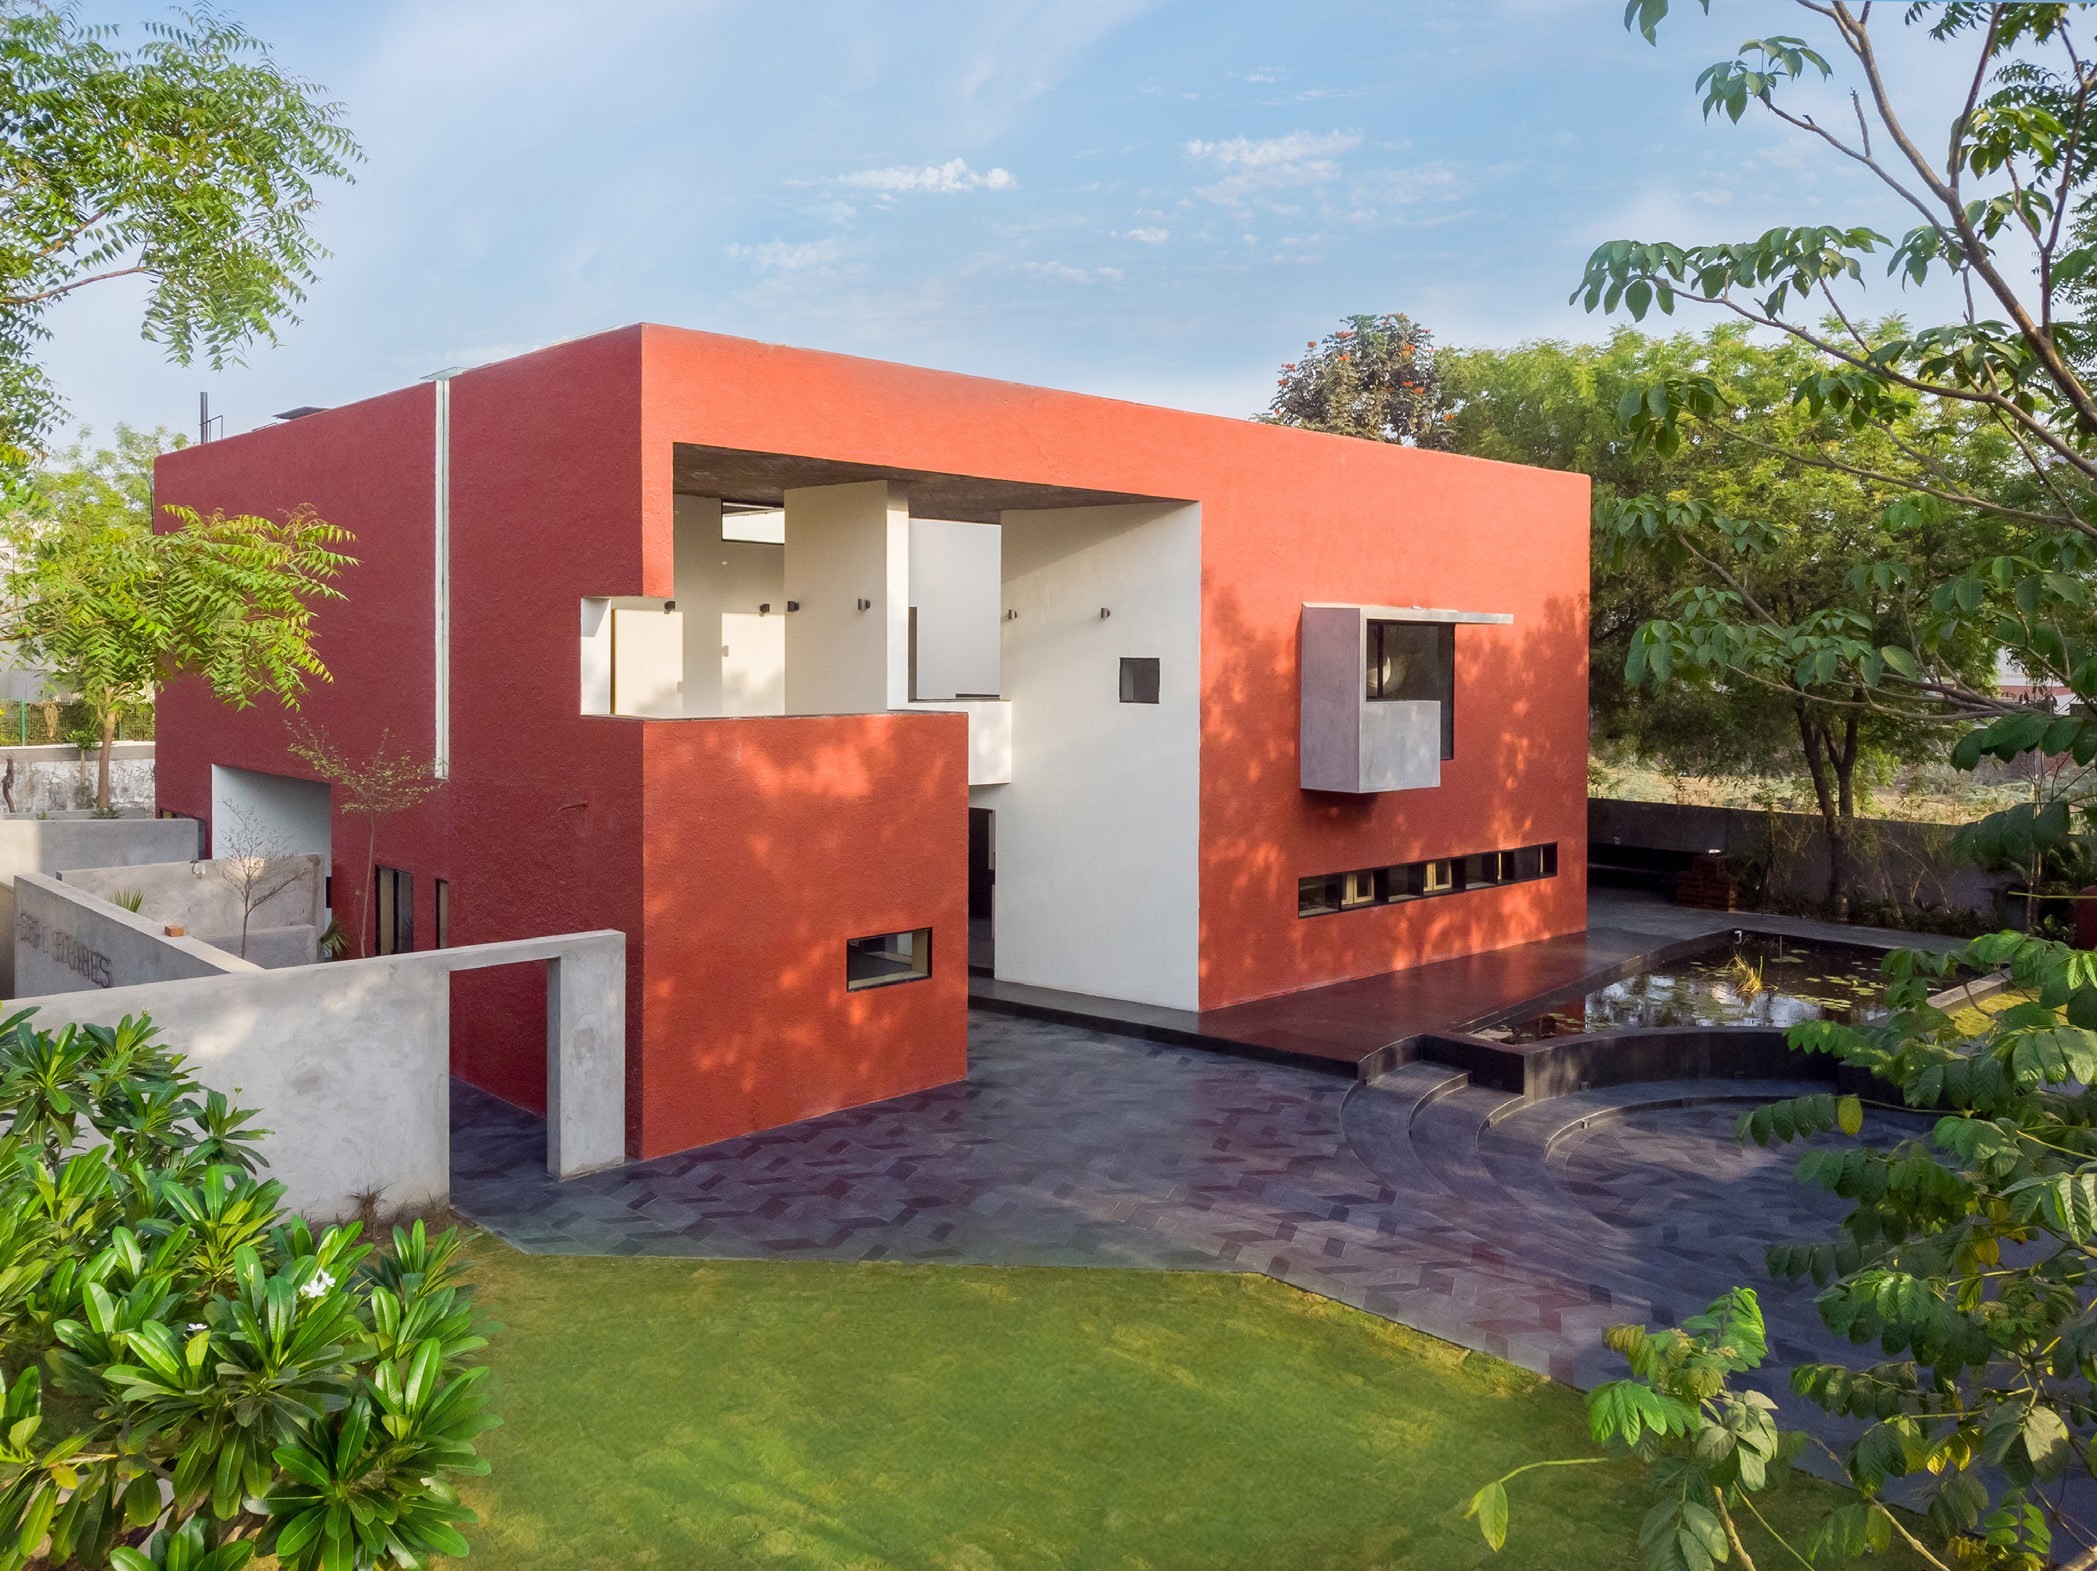 079 Stories, Residence designed by Studio Sangath at Ahmedabad